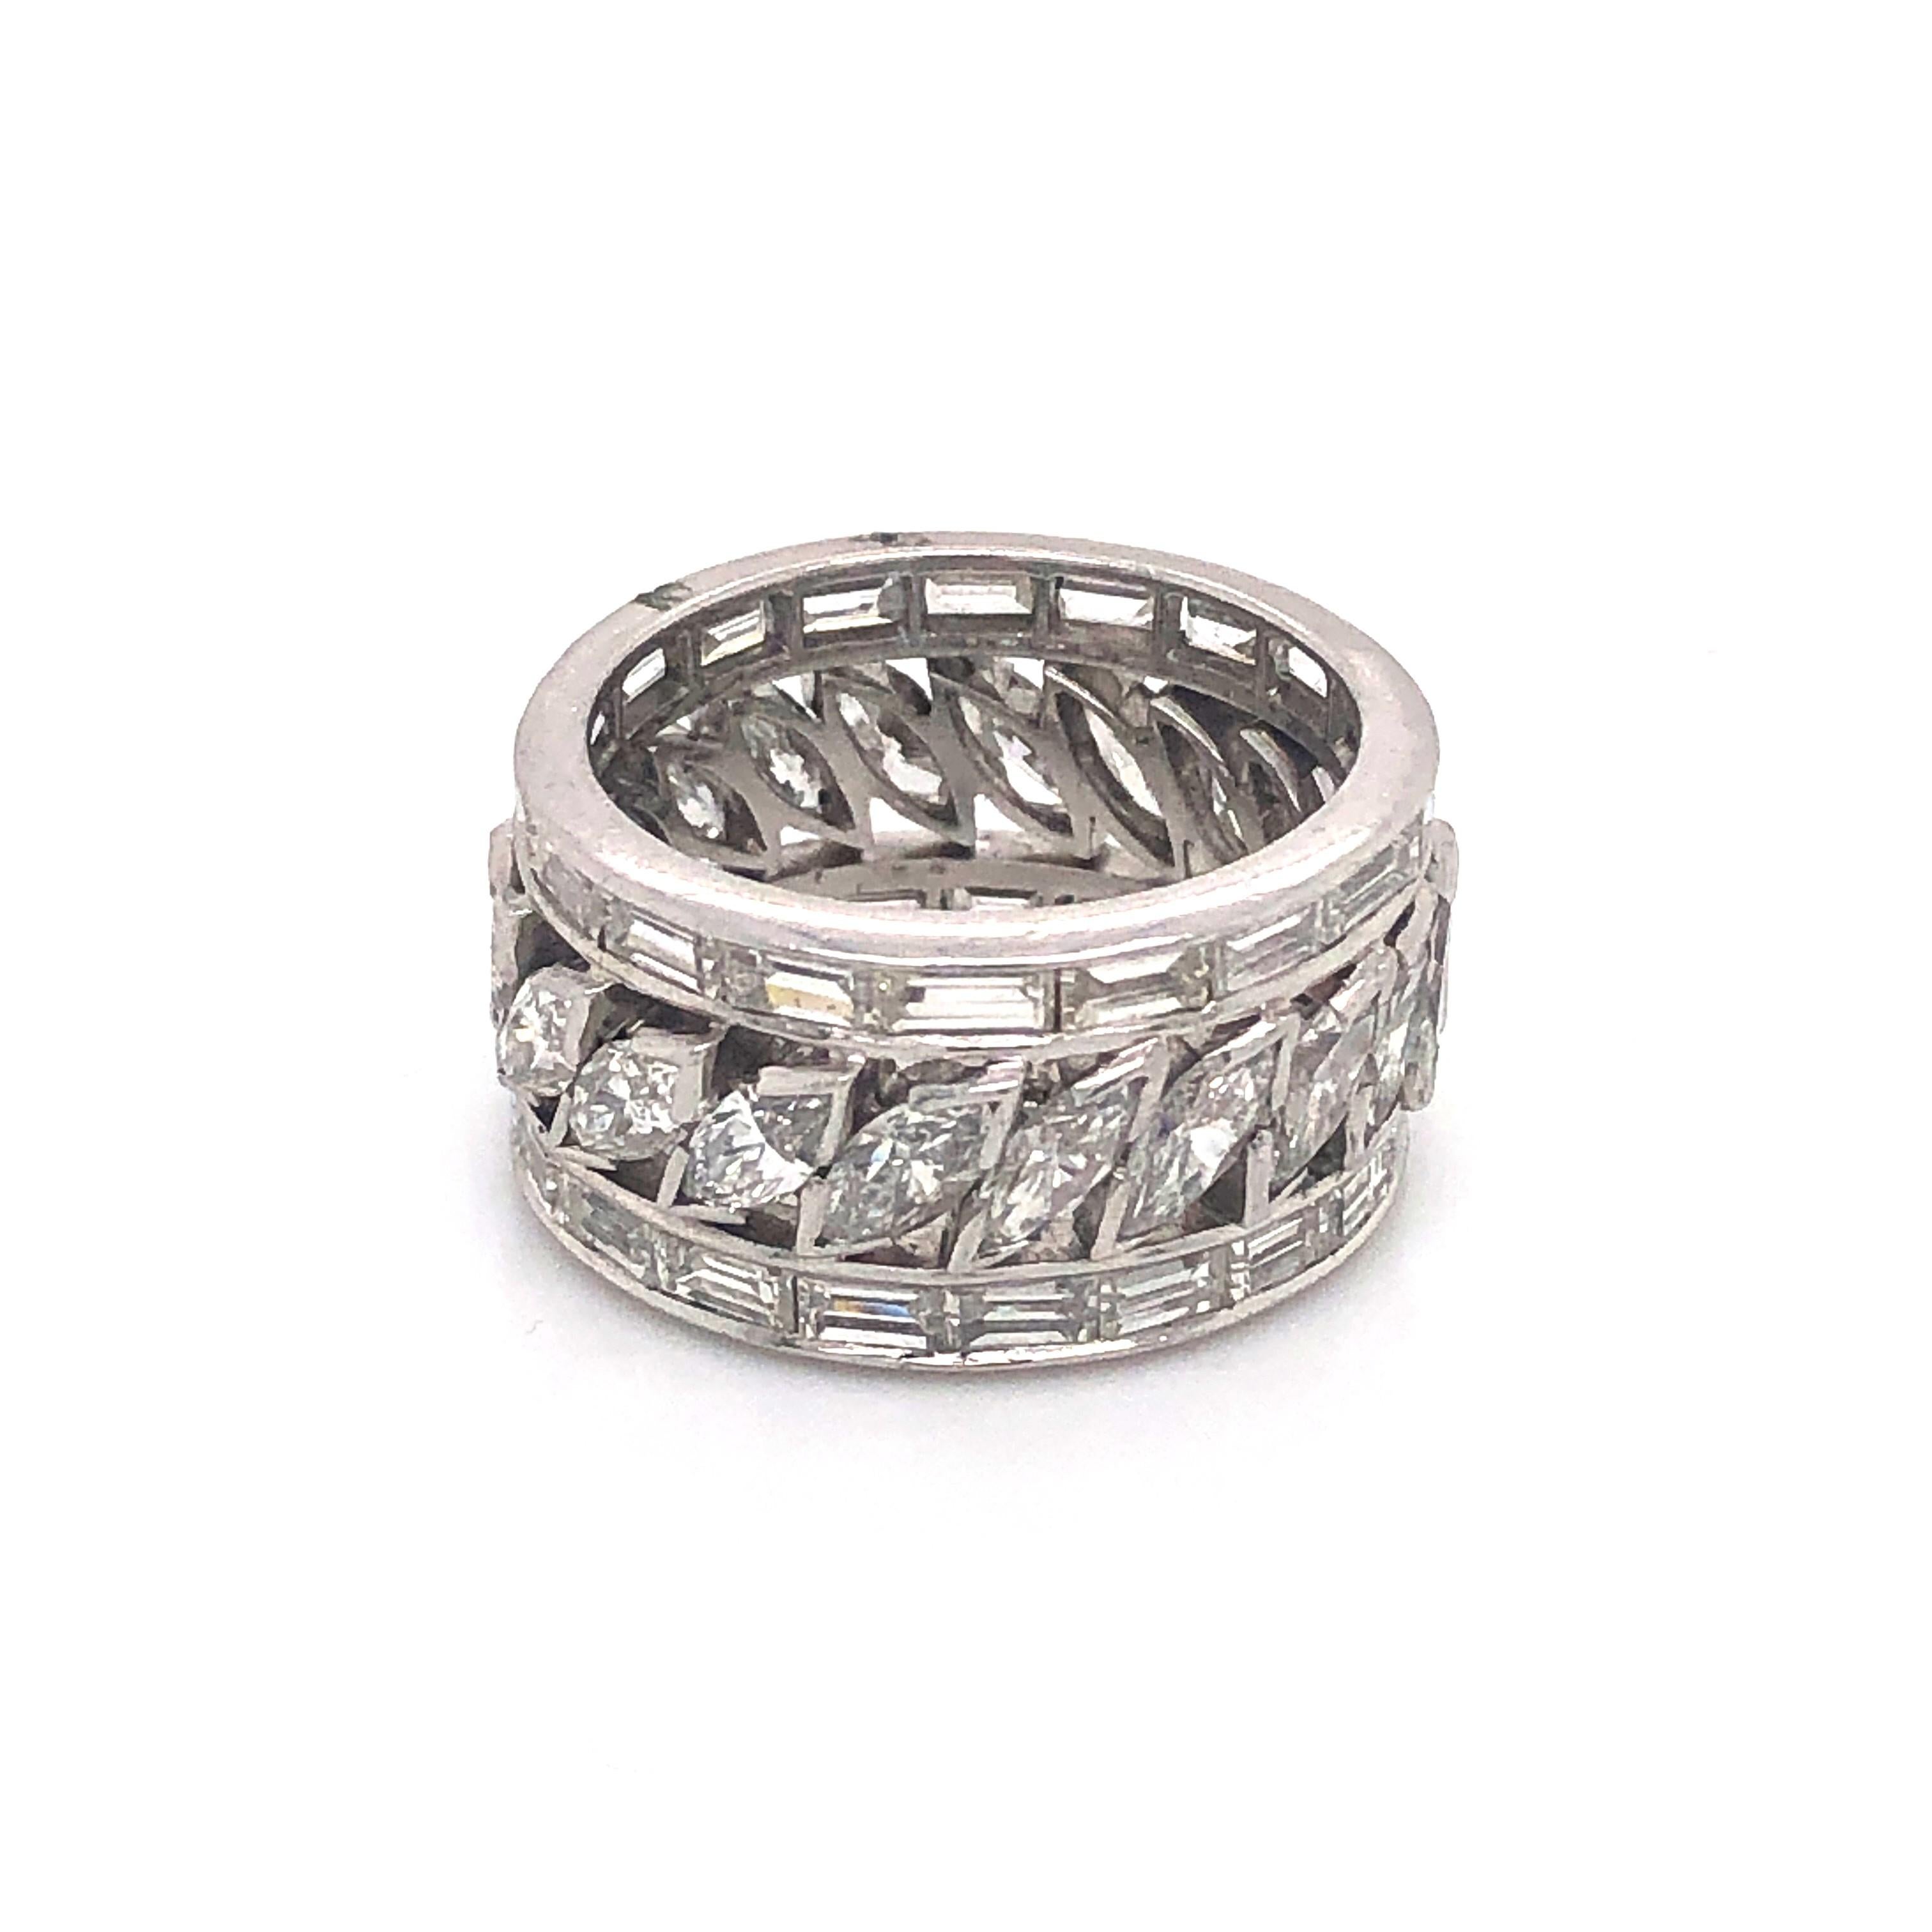 An eternity ring, set with baguette and marquise-cut diamonds, mounted in platinum. Estimated total diamond weight 4.40ct. Estimated colour G-I , estimated clarity SI-VS.
UK finger size L / USA 5¾.